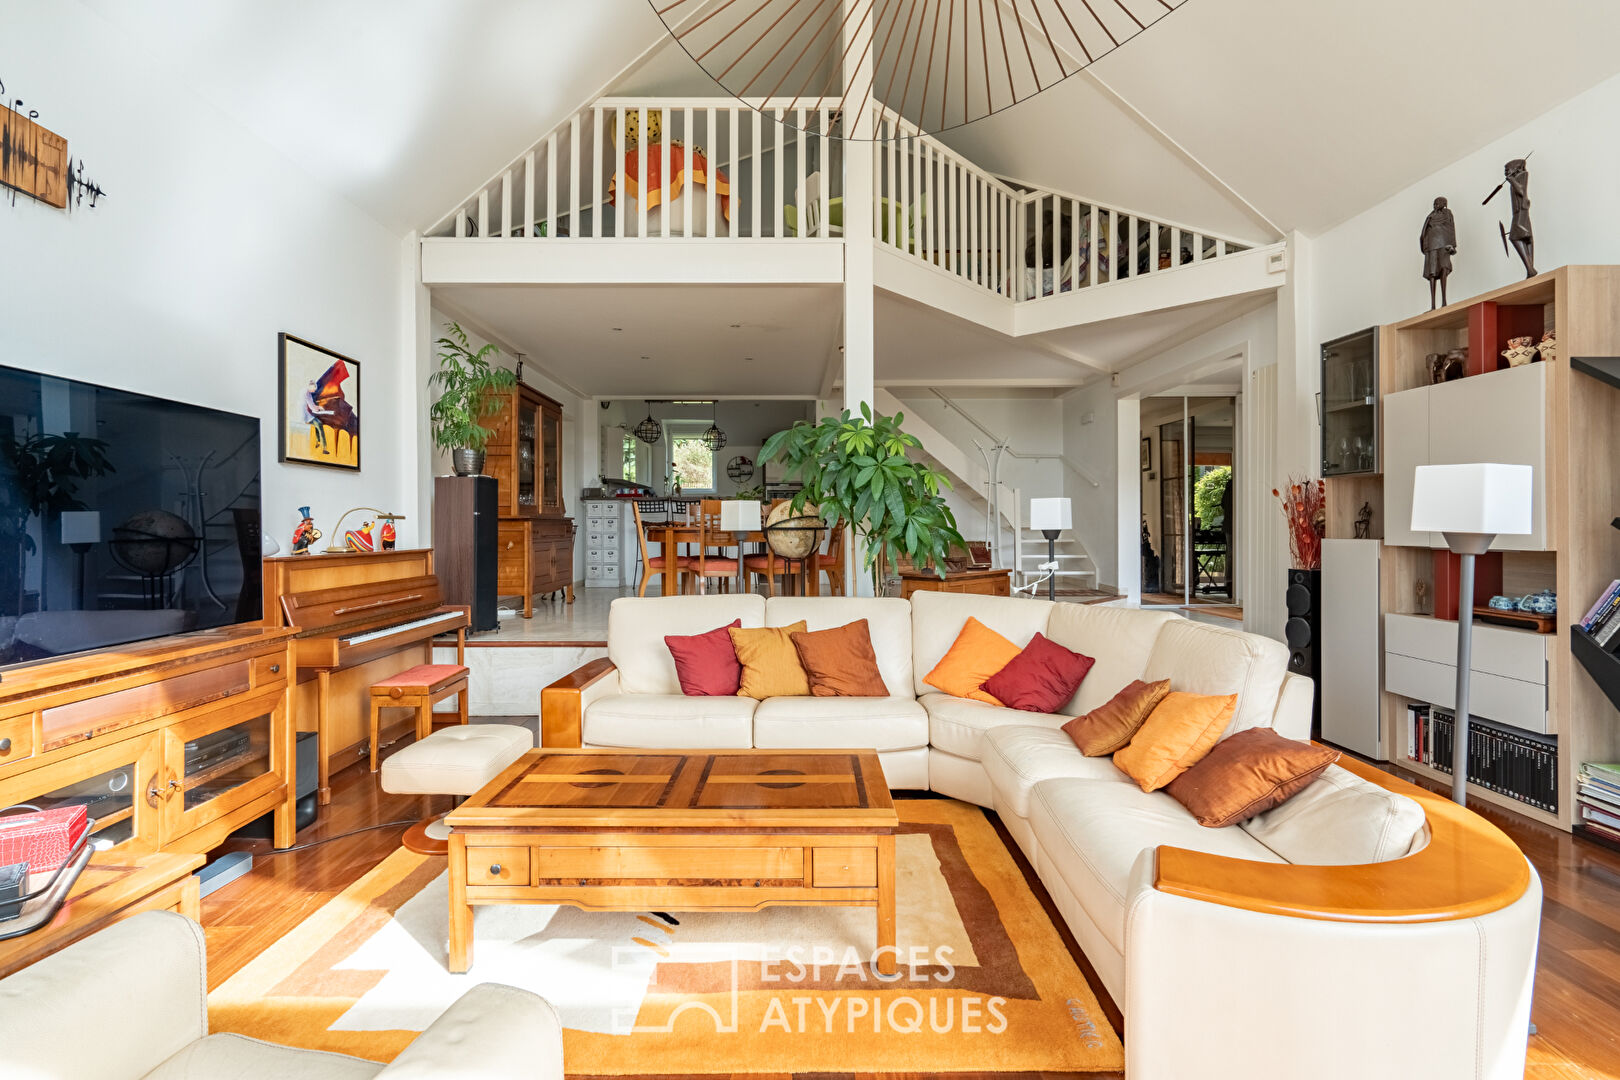 Superb family home in the heart of the Chevreuse valley